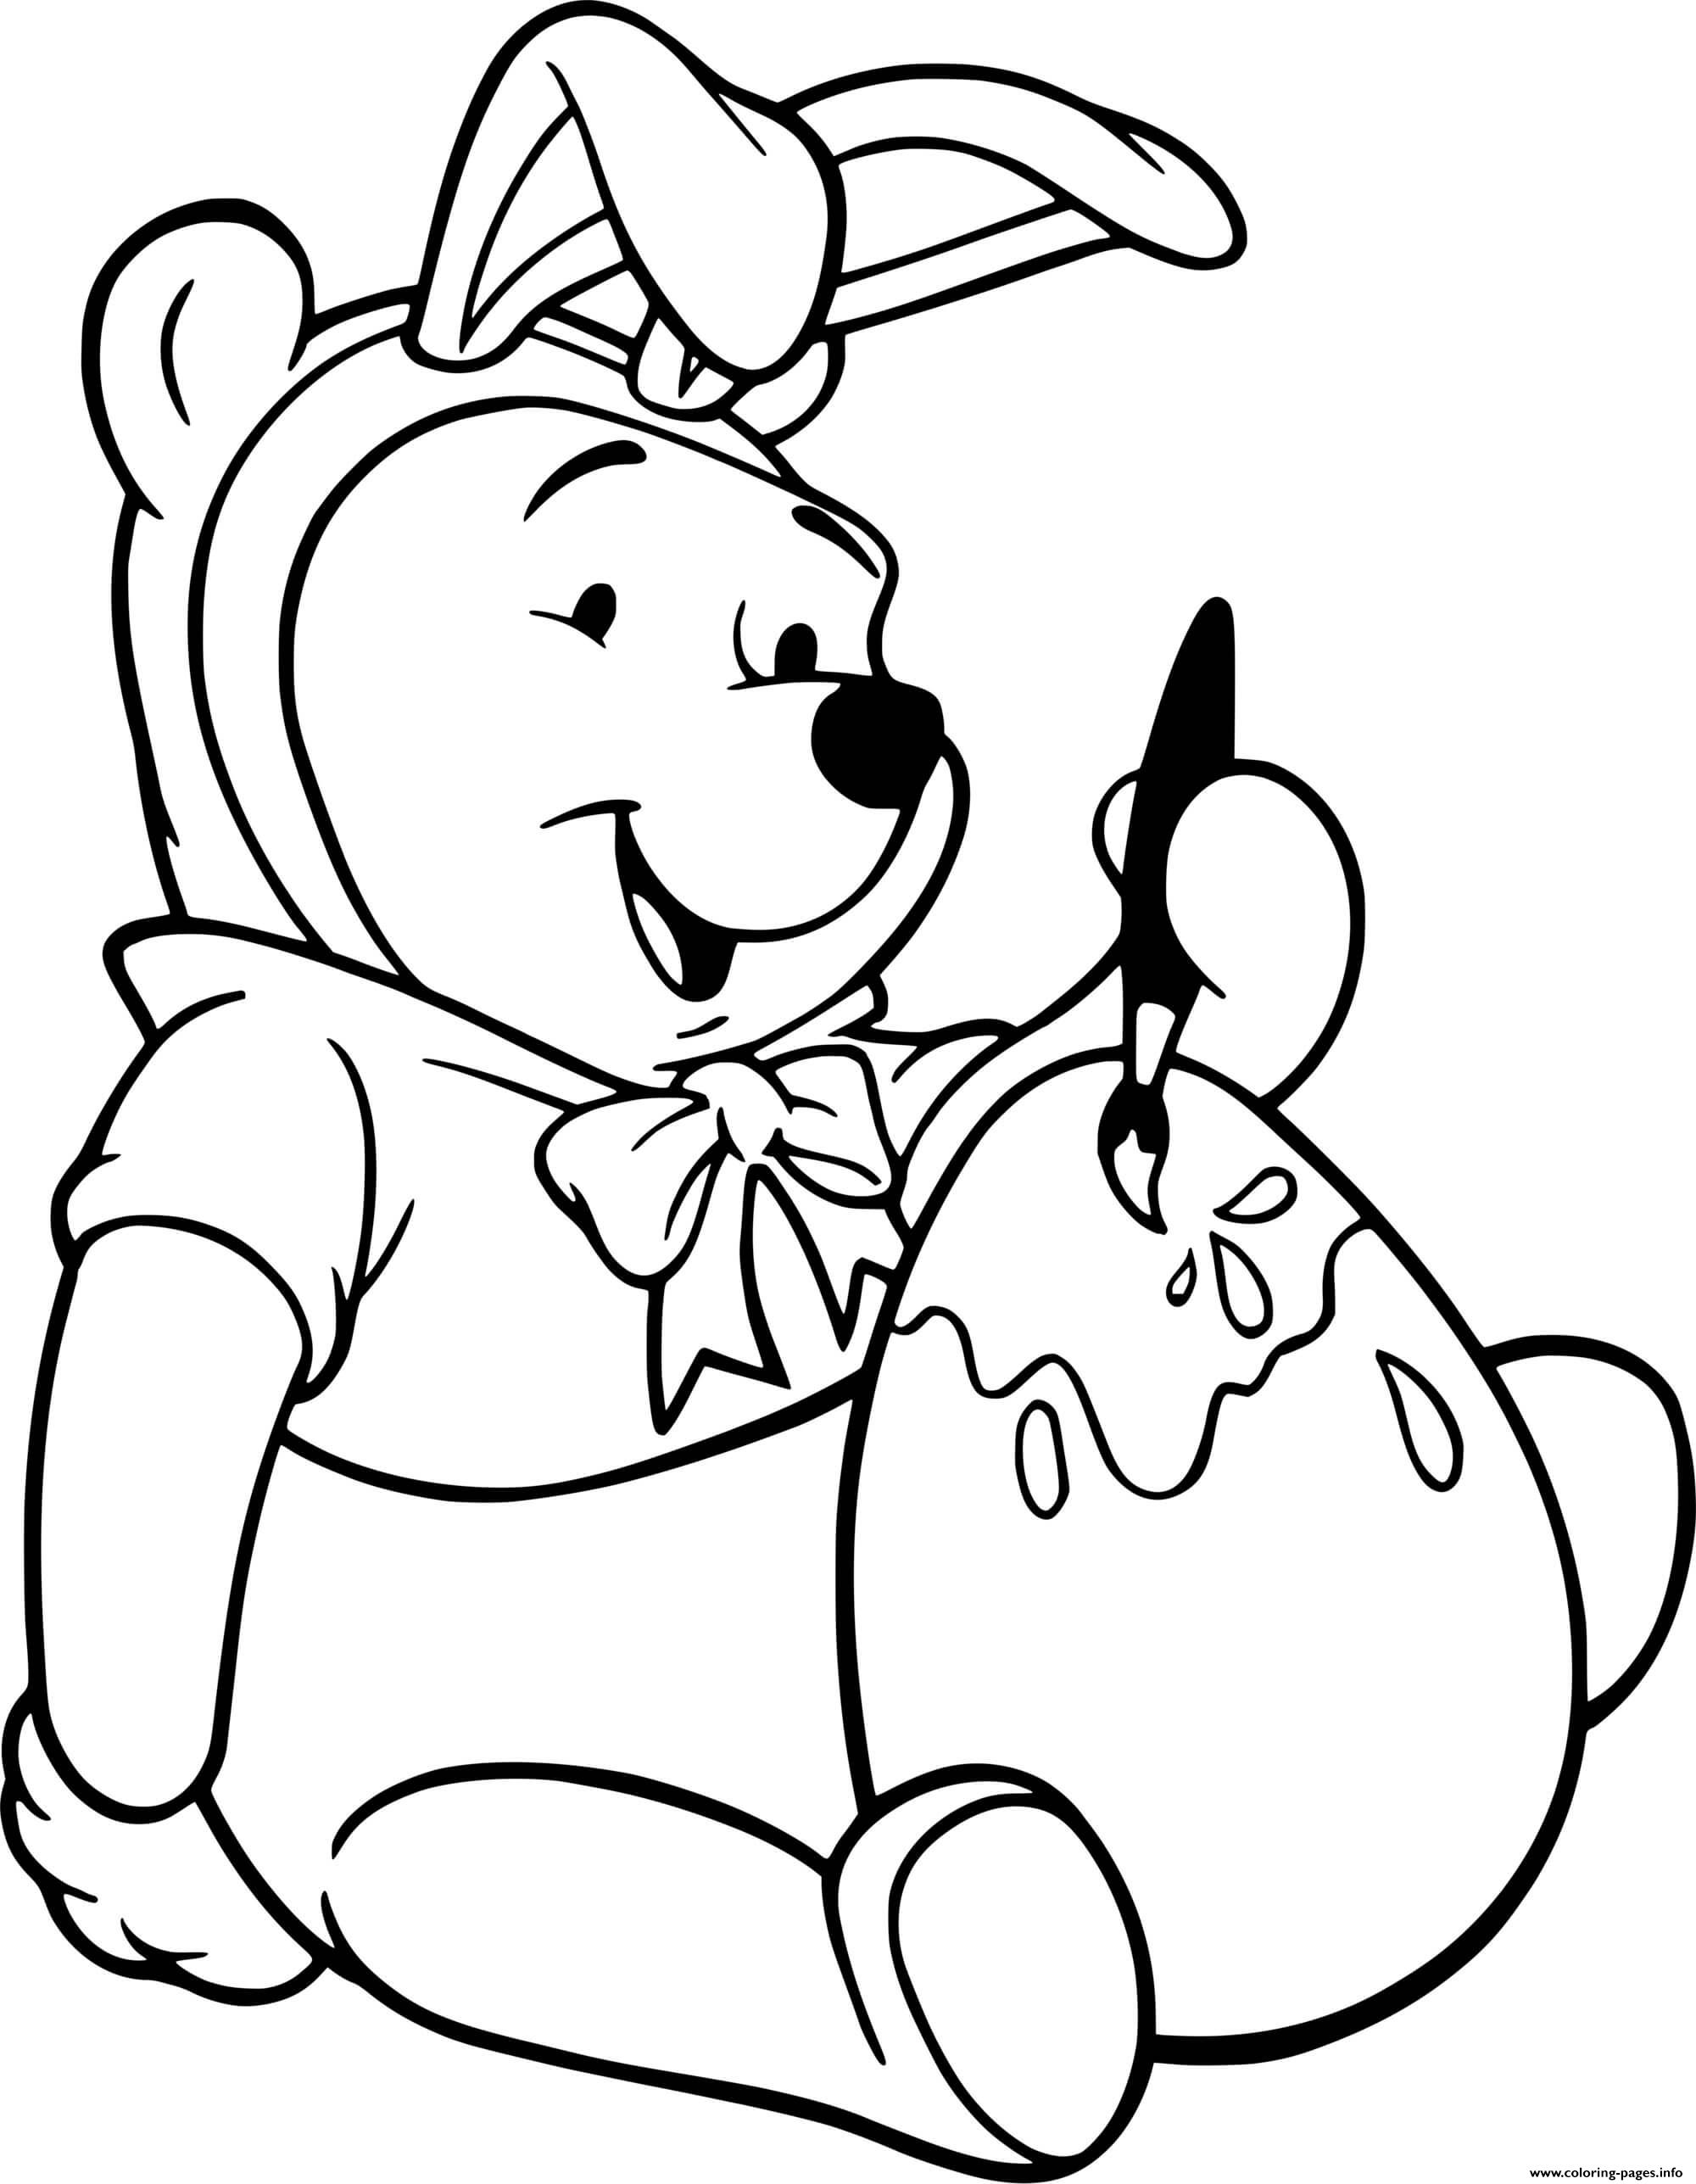 Winnie The Pooh Painting Easter Egg coloring